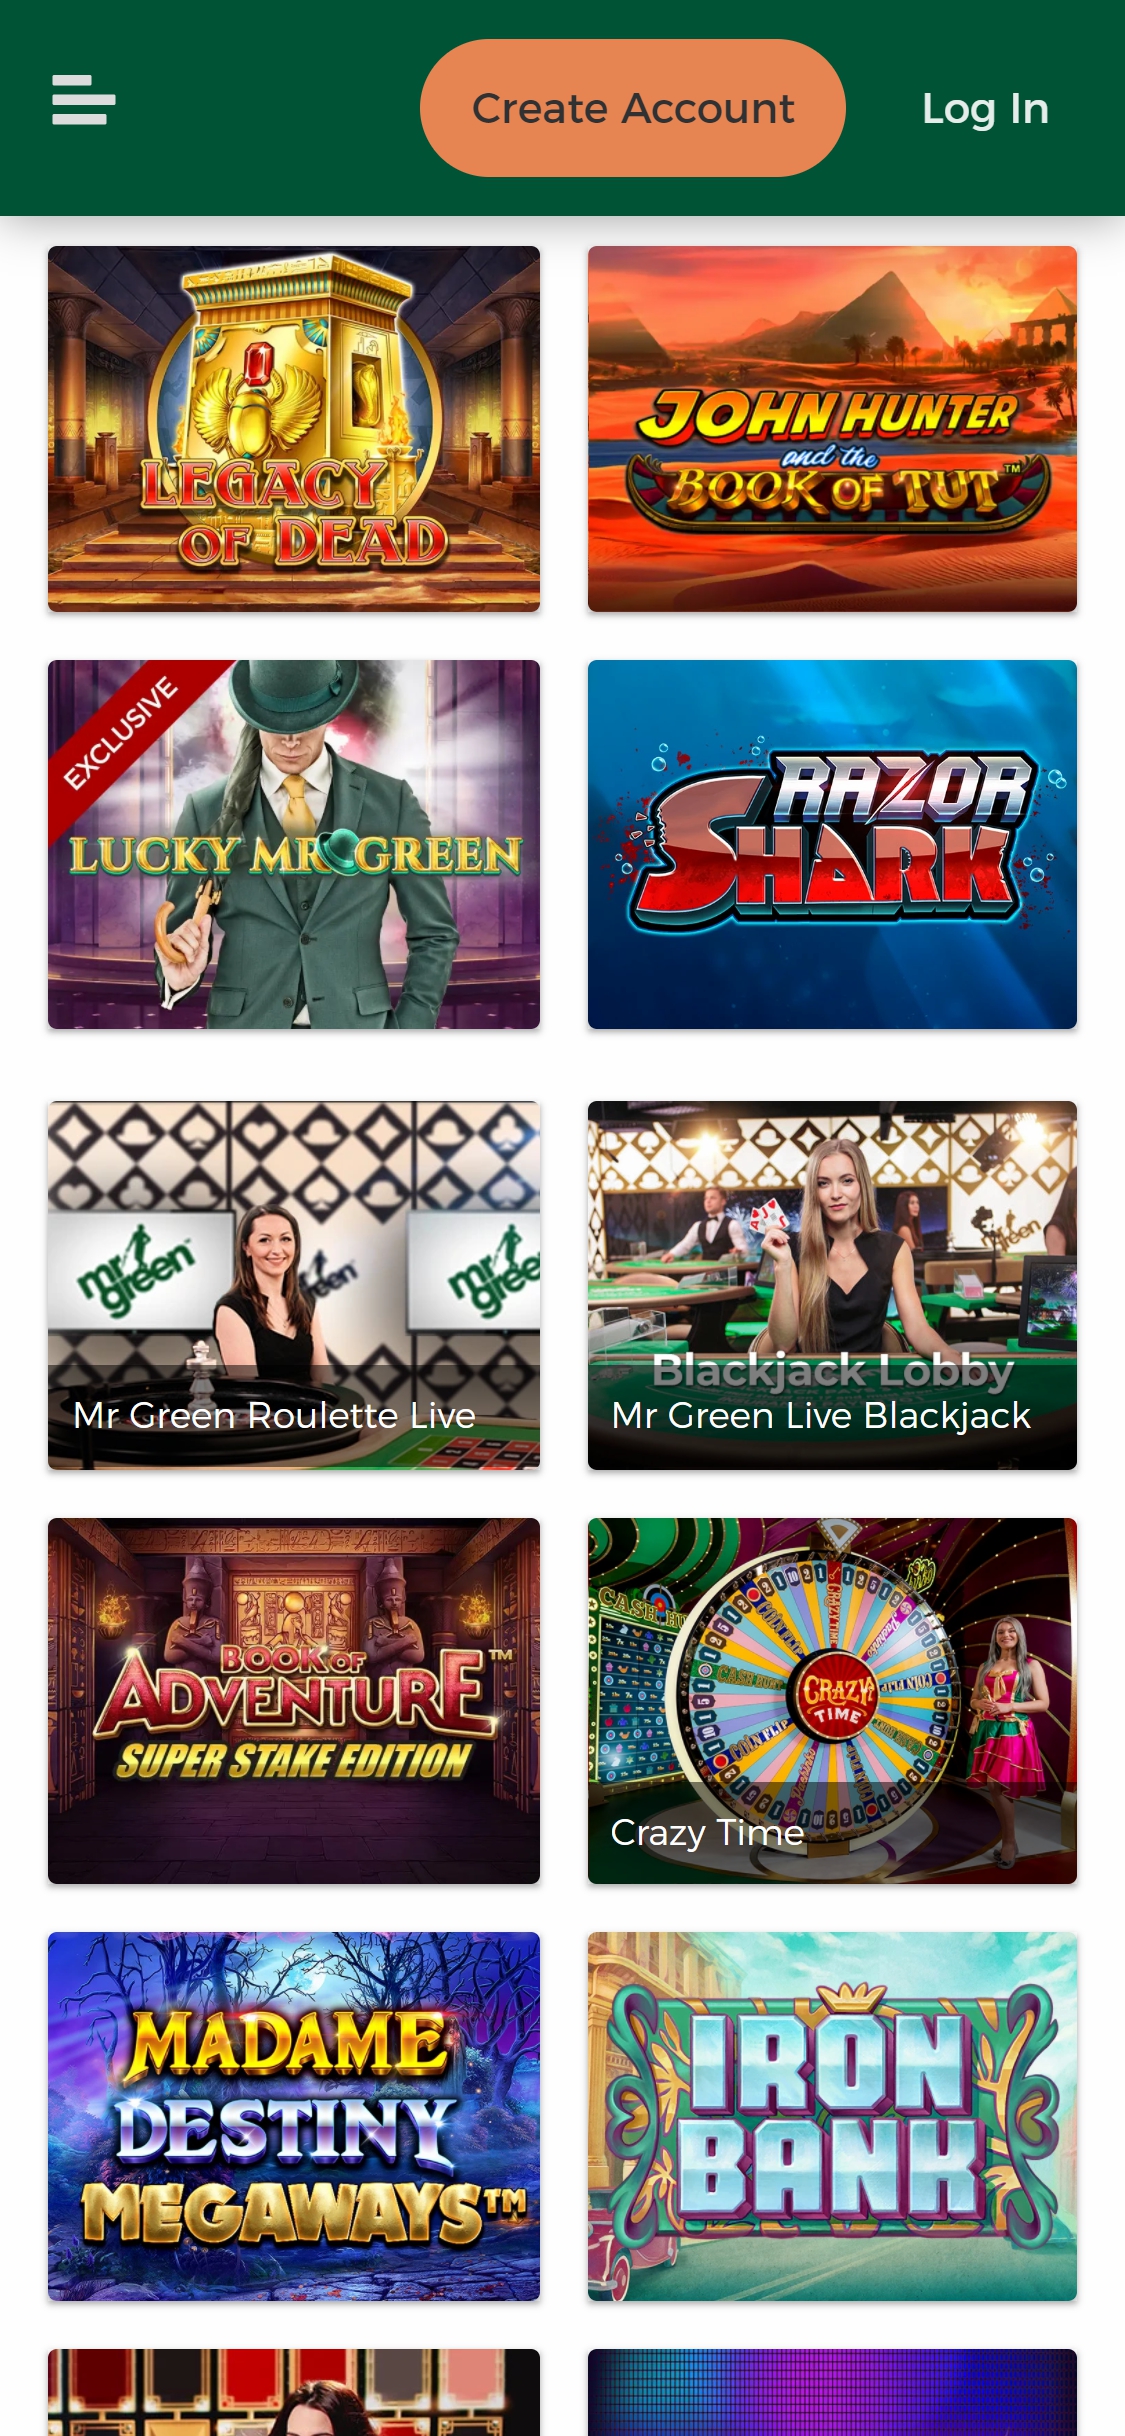 Mr Green Casino Mobile Games Review